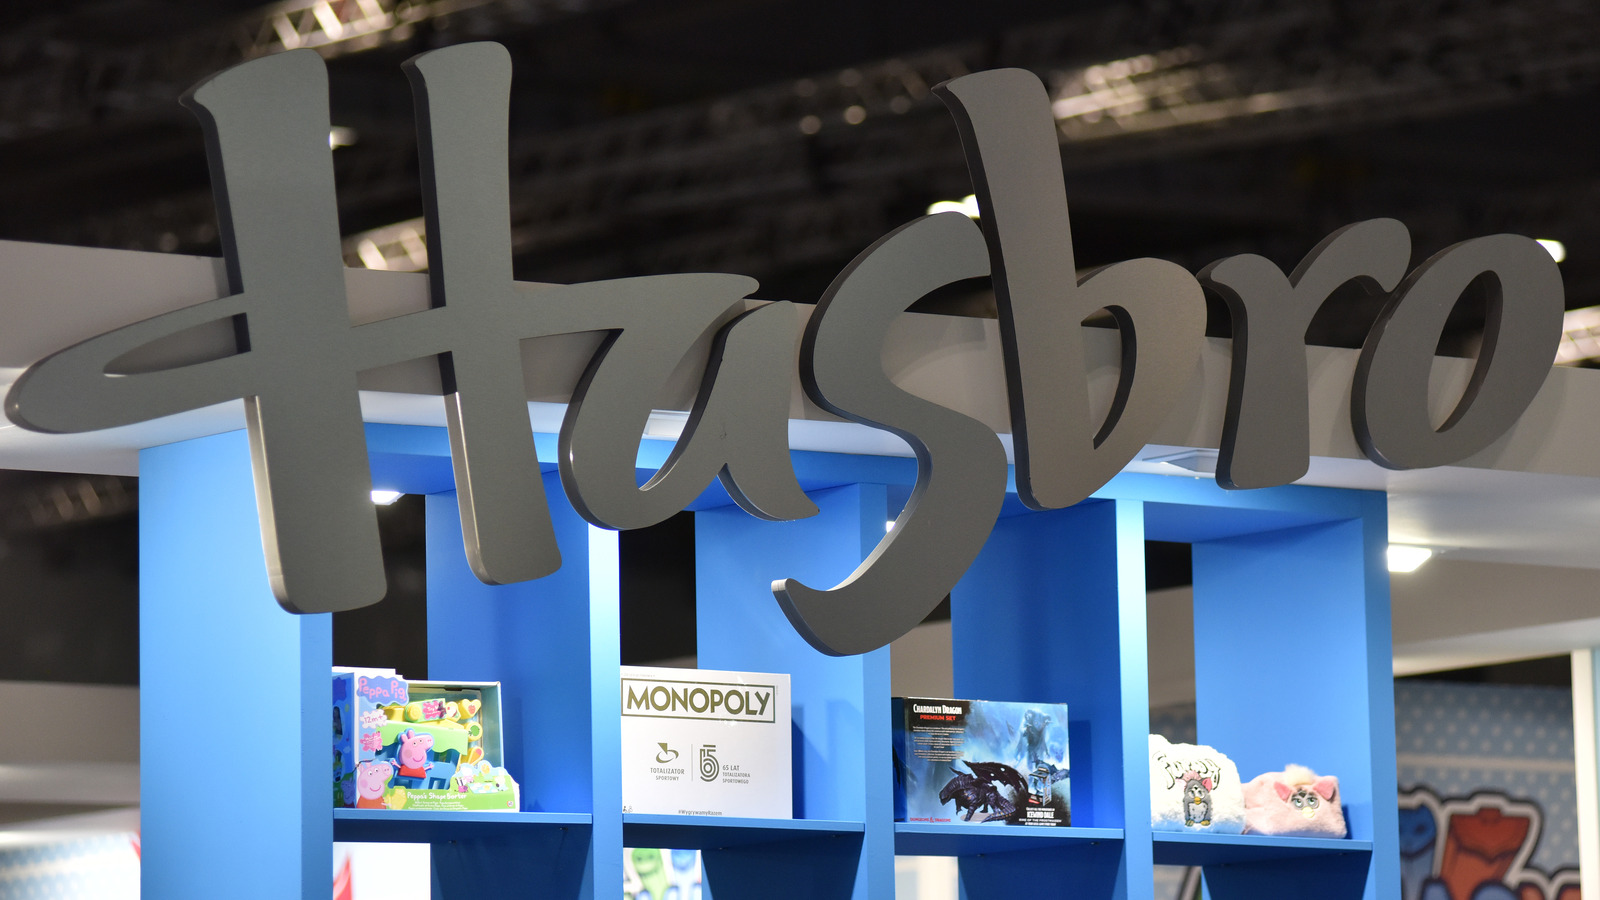 The Real Meaning Behind Hasbro's Brand Name